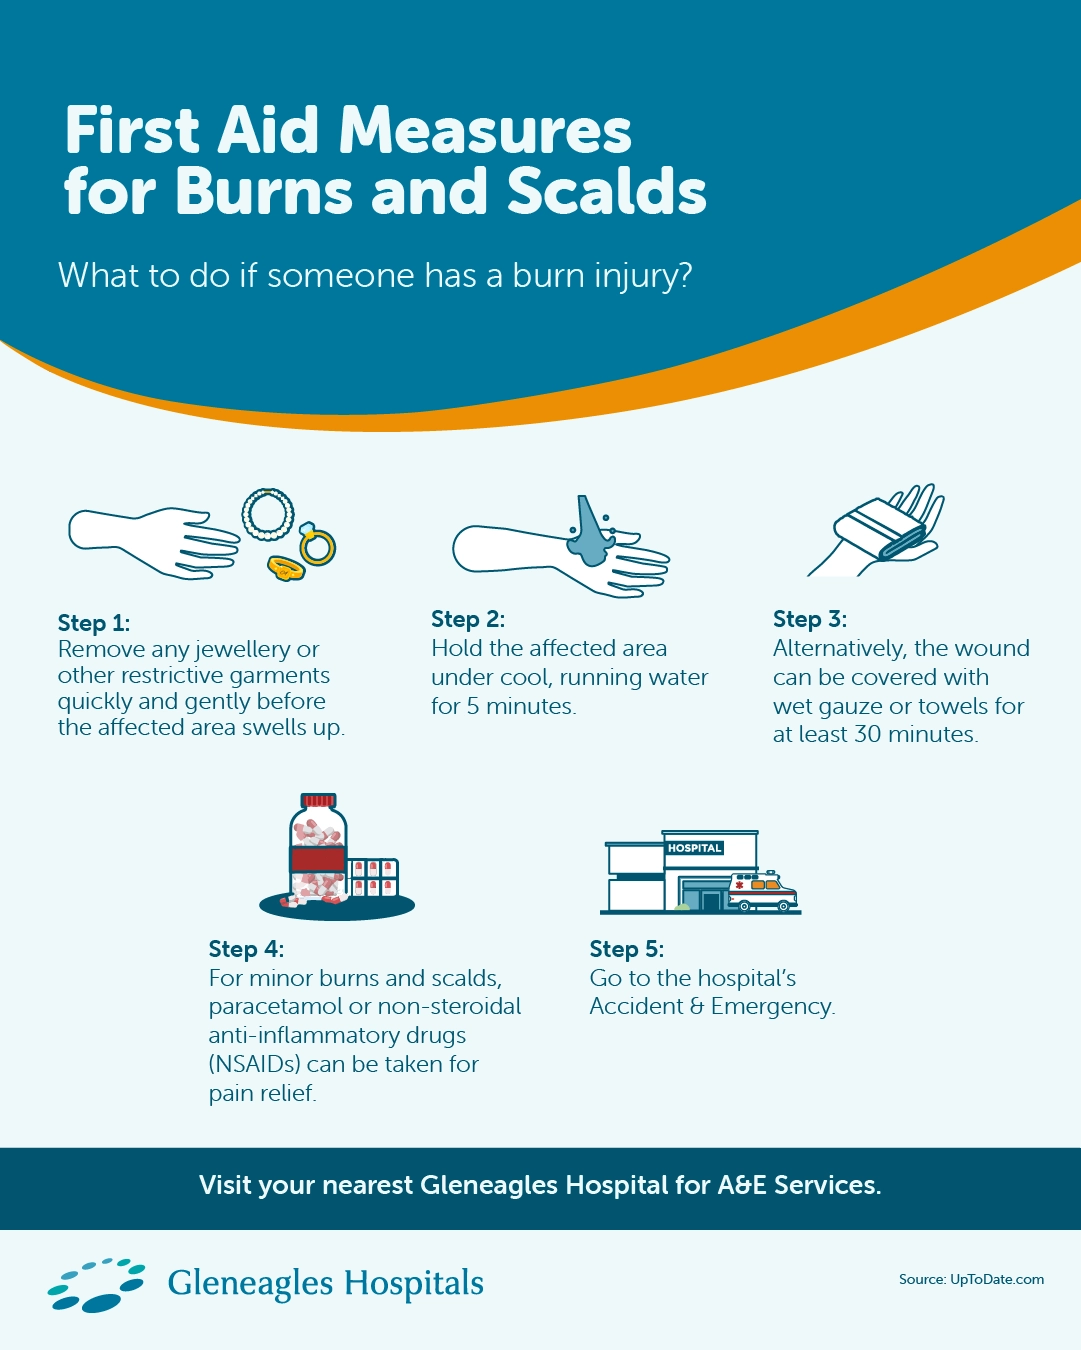 Step-by-step First Aid Measures for Burns and Scalds